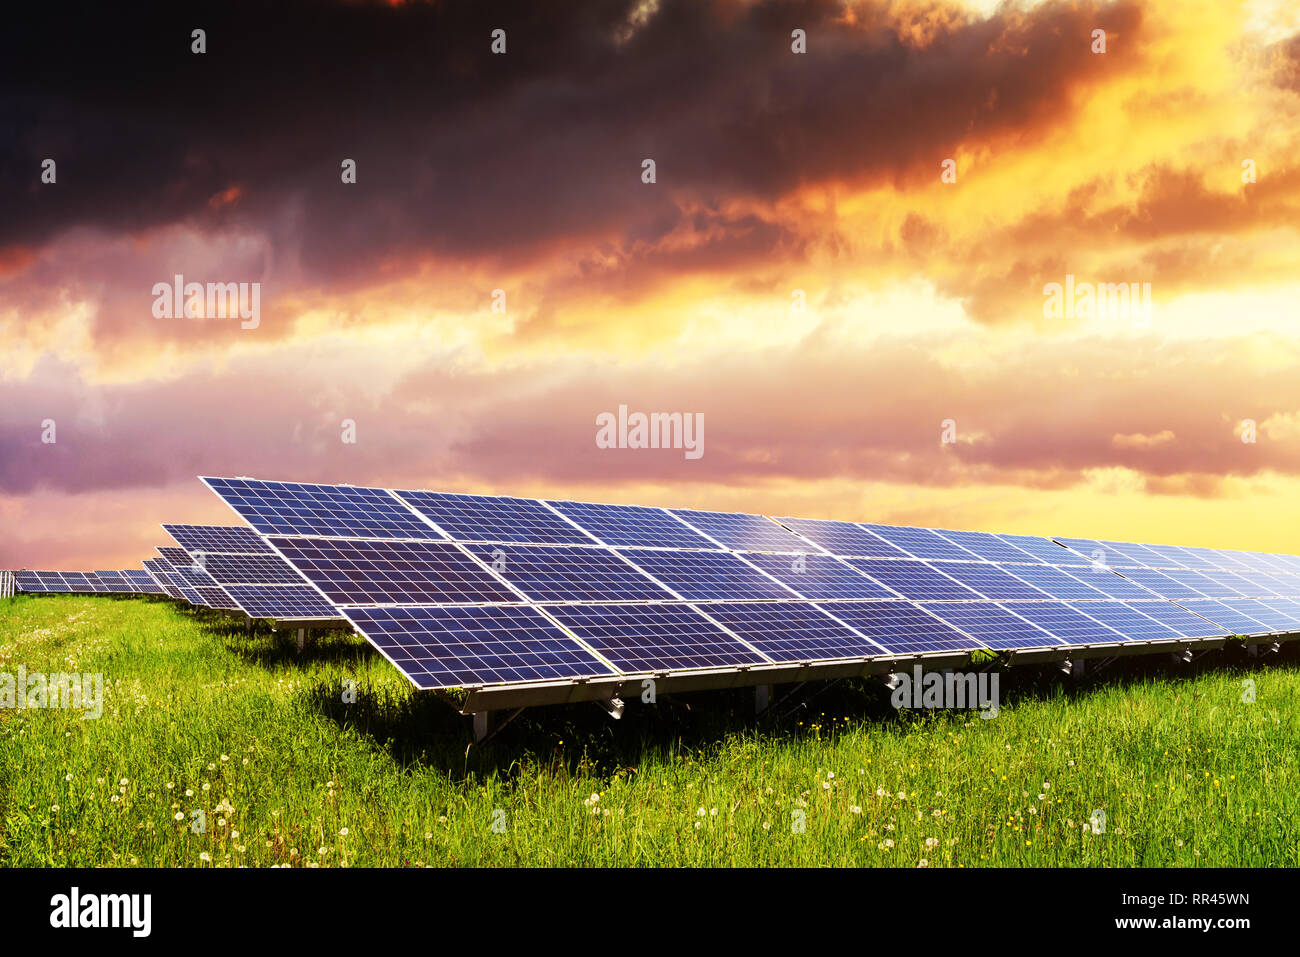 Solar panel on blue sky background. Green grass and cloudy sky. Alternative energy concept Stock Photo